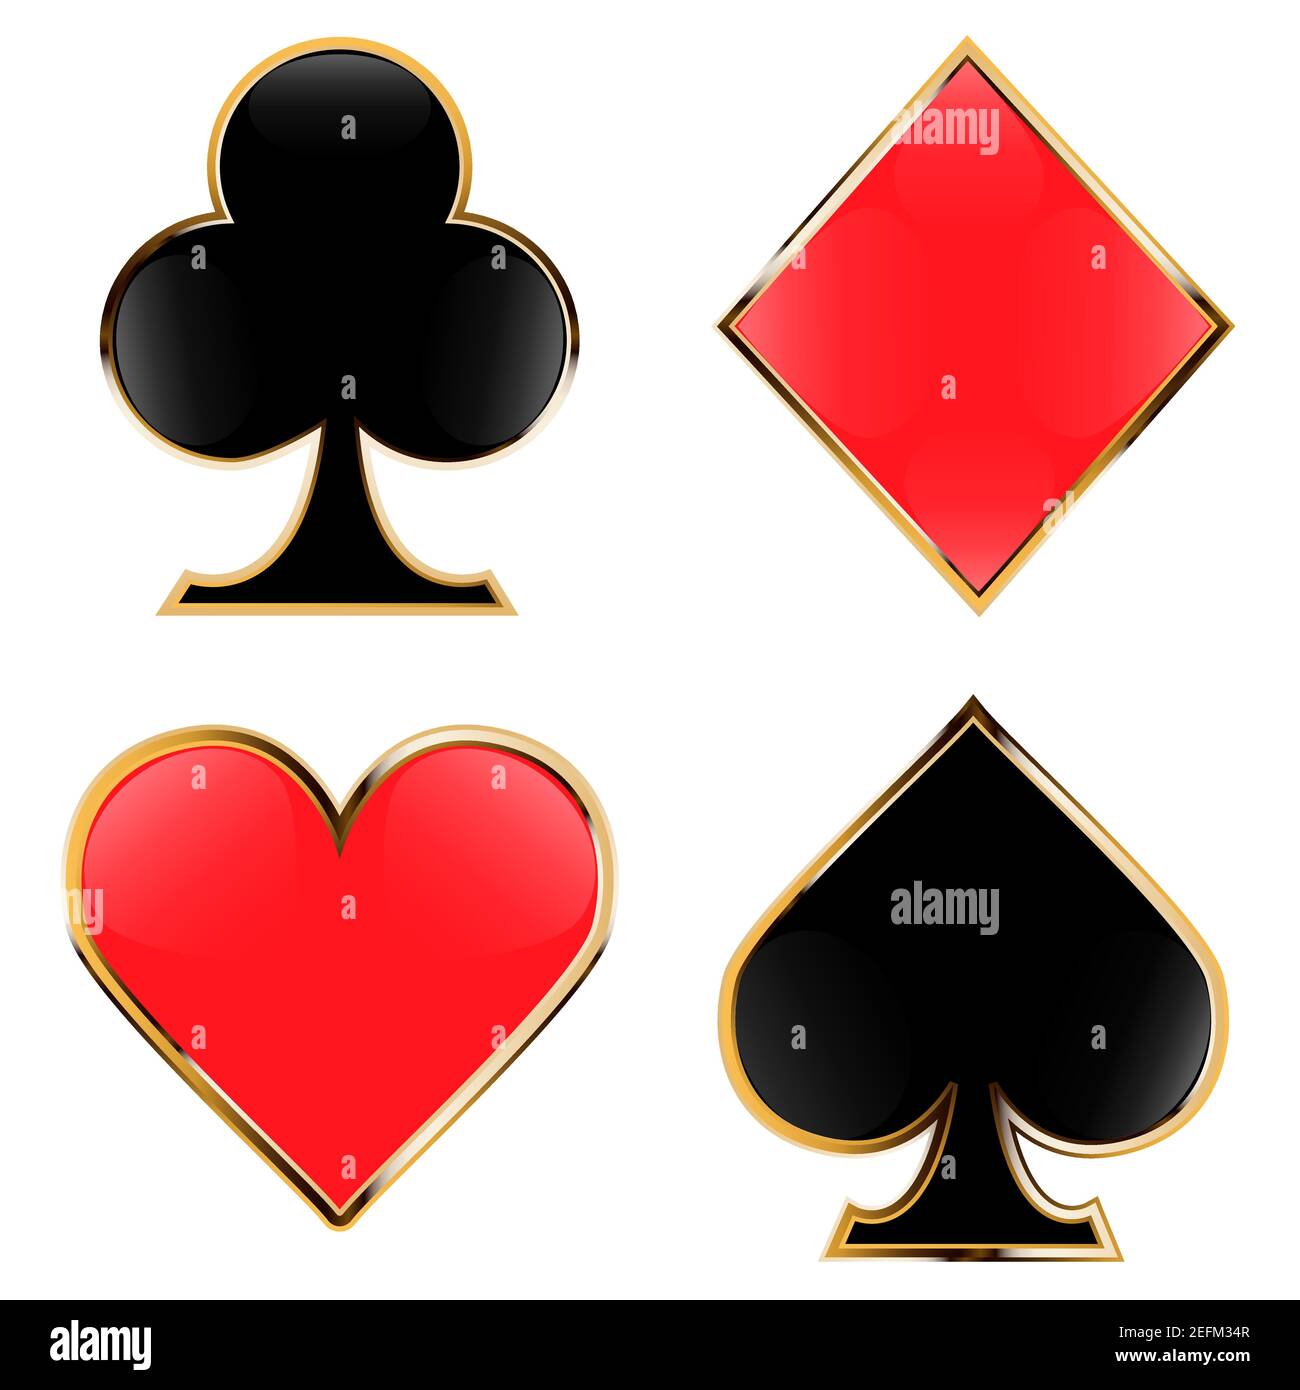 Baccarat Card Game High Resolution Stock Photography and Images - Alamy